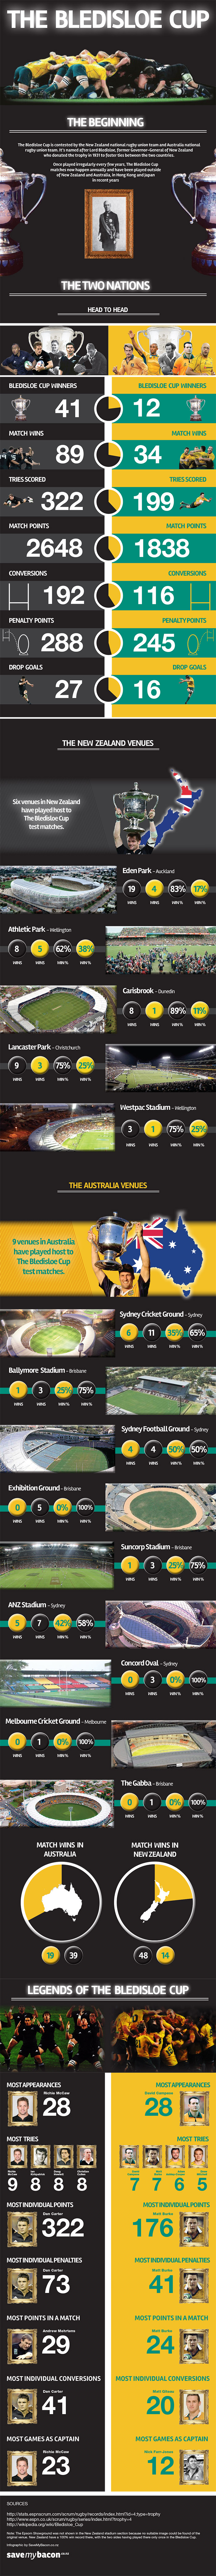 The Bledisloe Cup Infographic